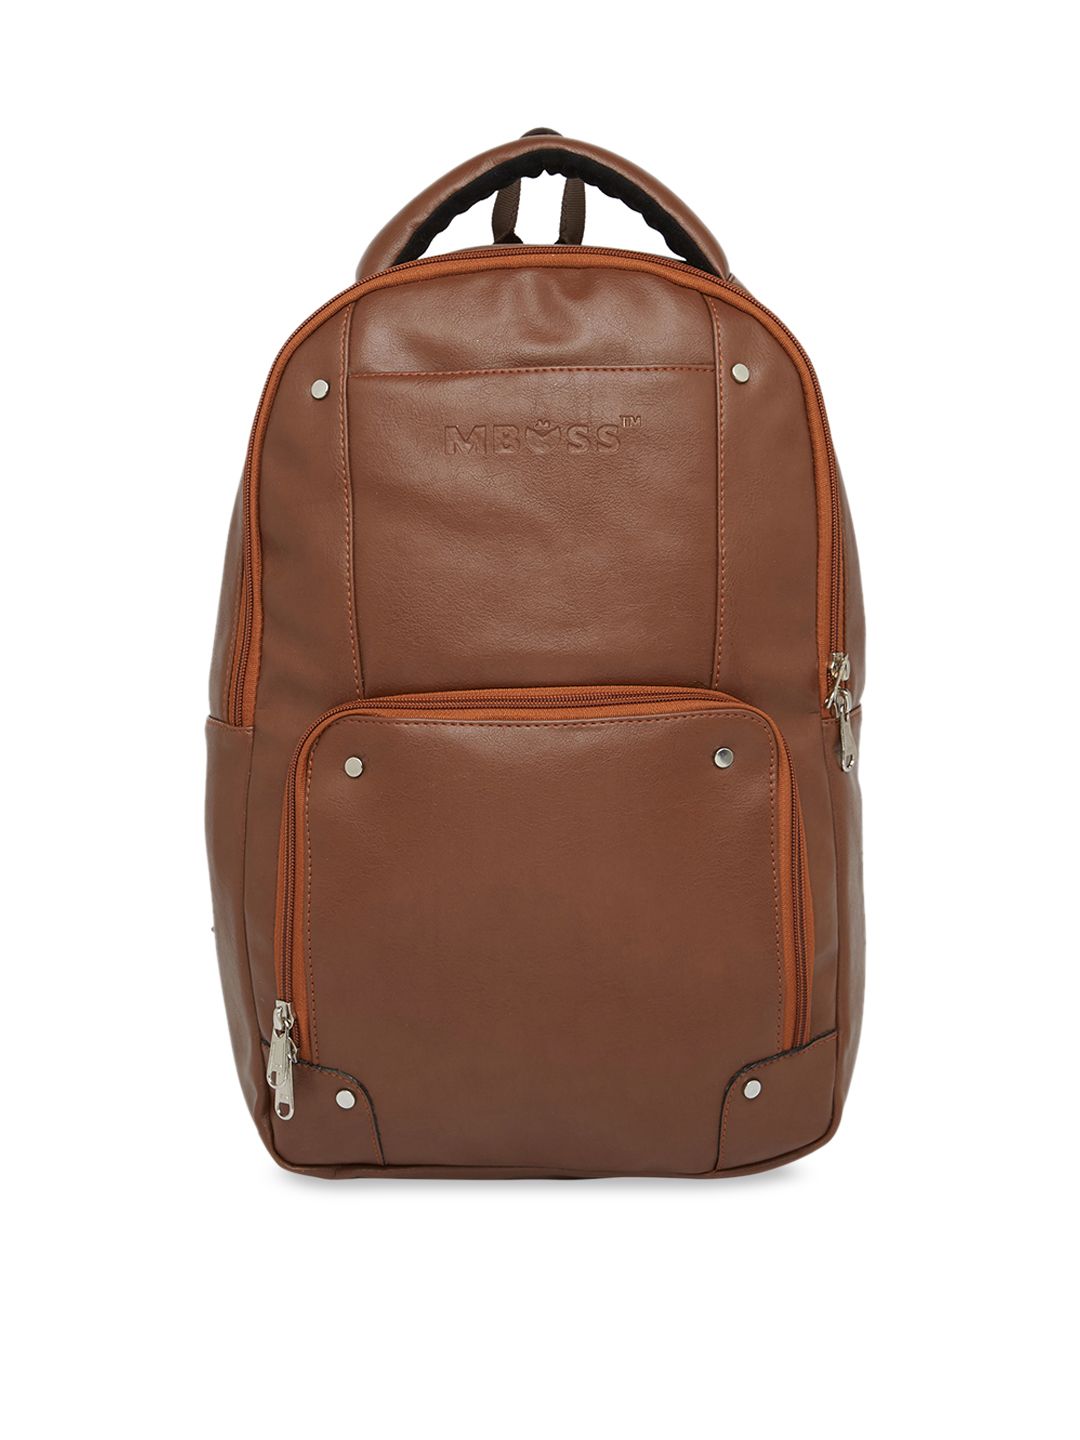 MBOSS Unisex Tan Solid Backpack Price in India